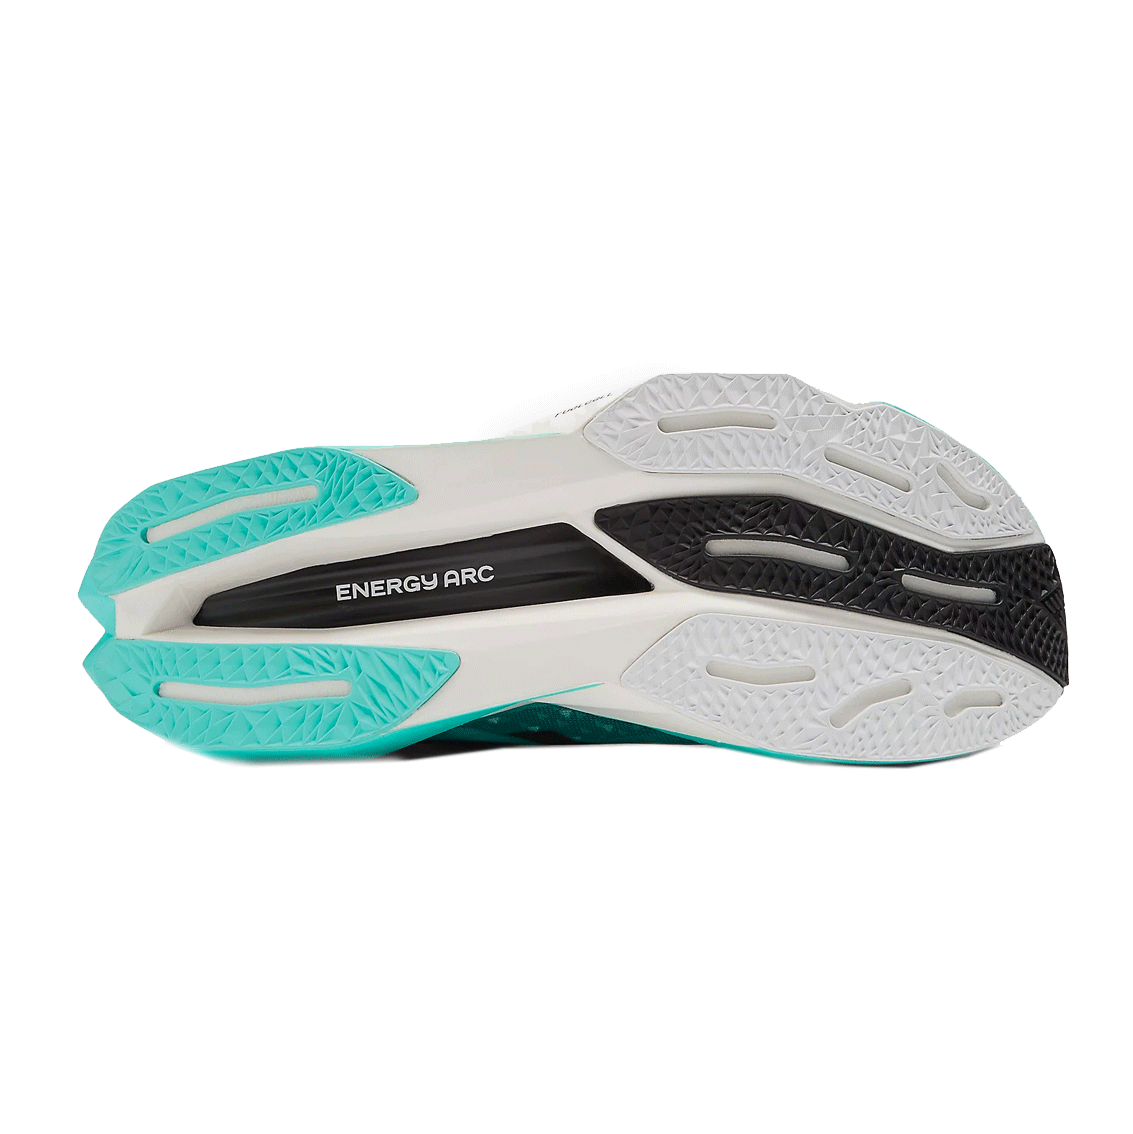 Womens New Balance FuelCell SuperComp Elite v4